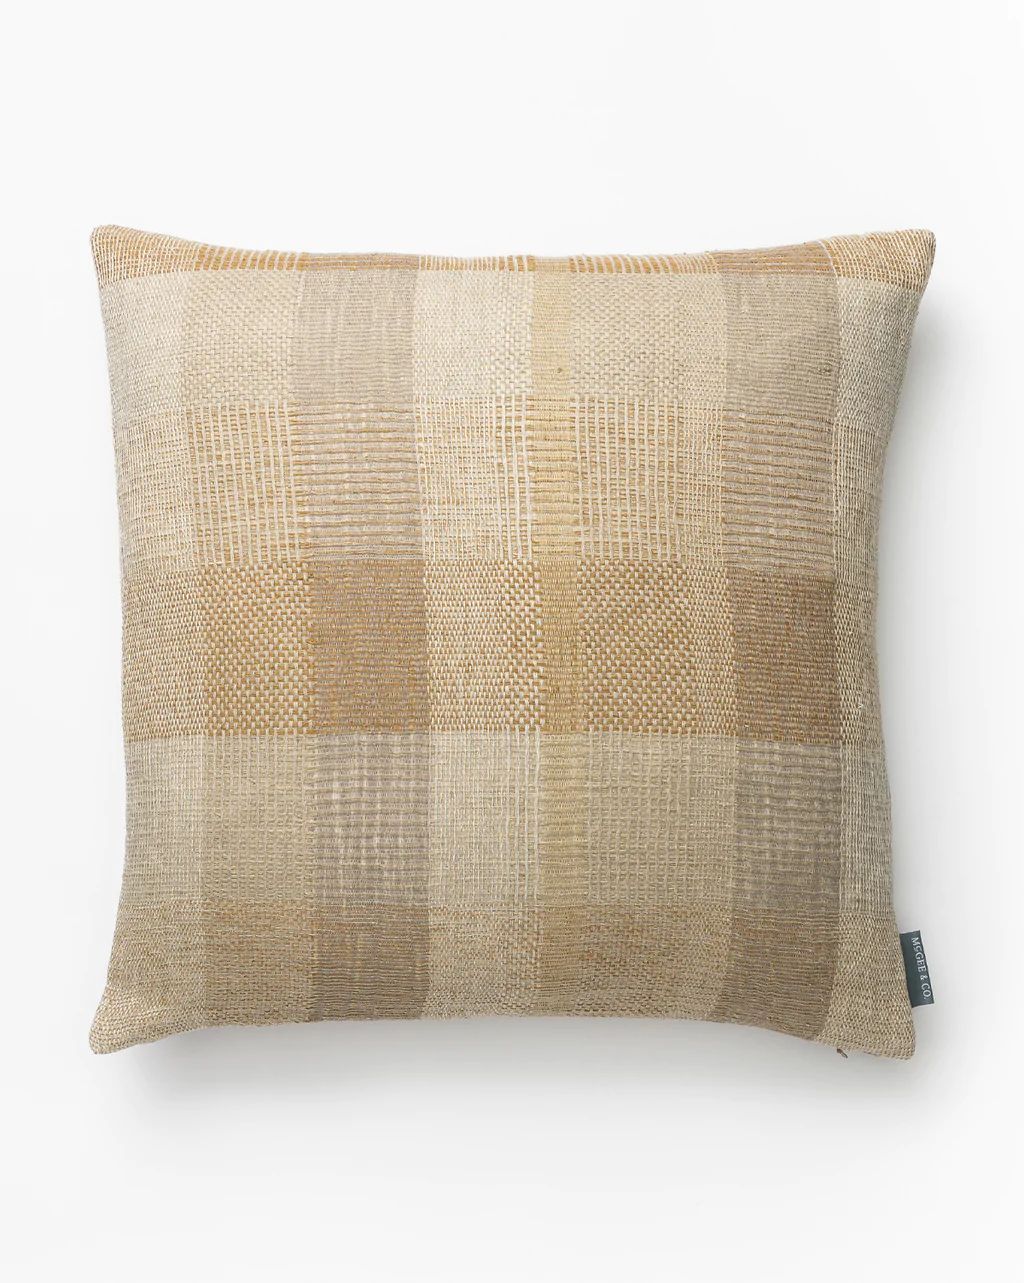 Lydia Block Stripe Pillow Cover | McGee & Co.